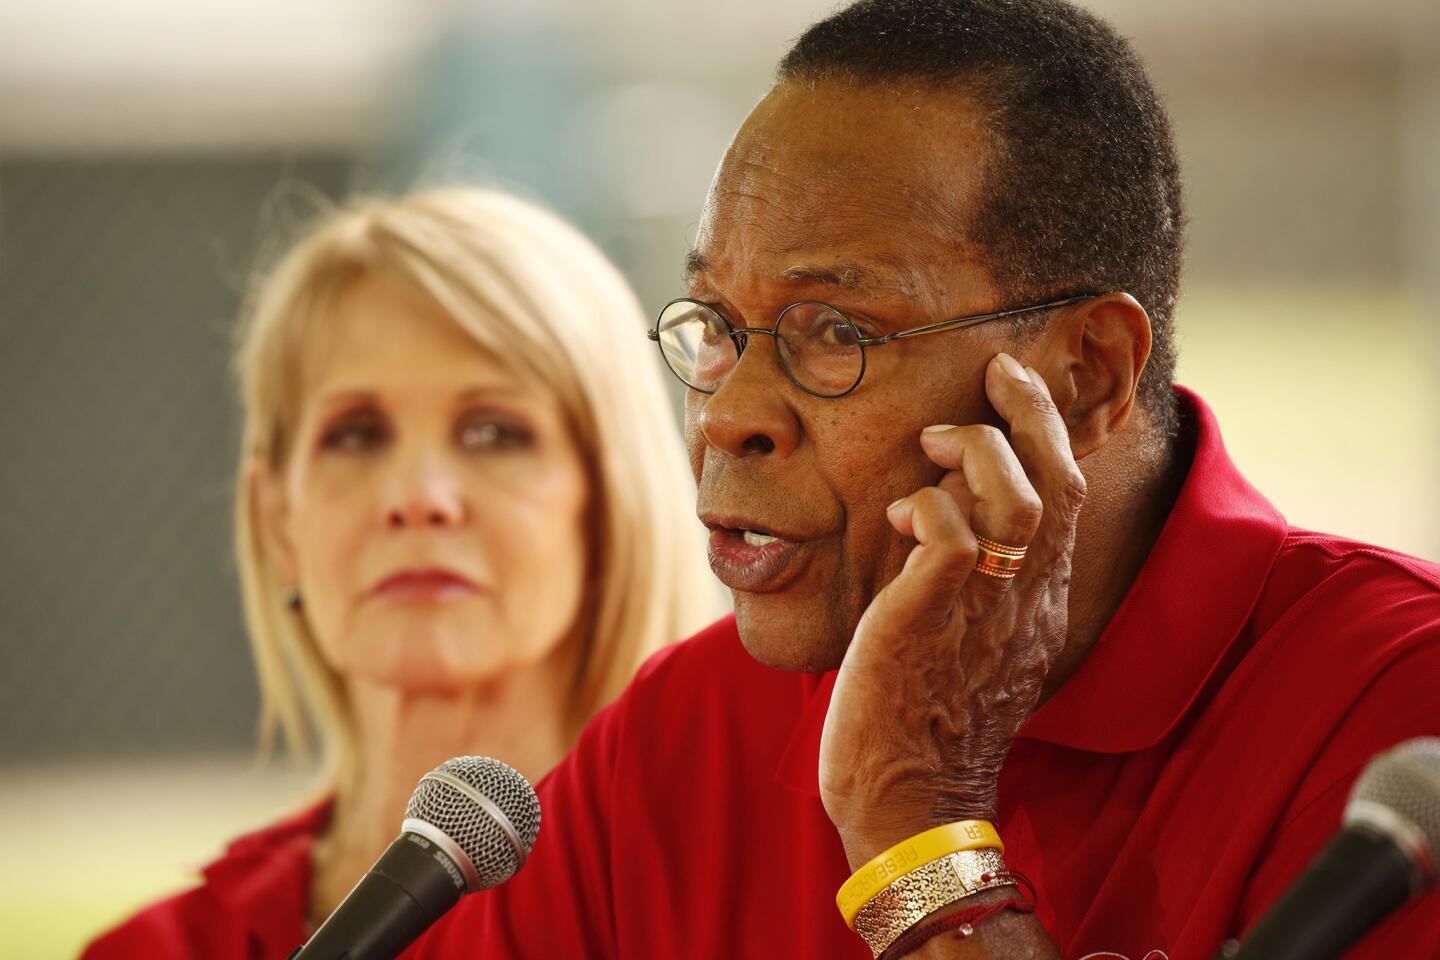 Rod Carew bringing lots of heart to Hall of Fame this weekend